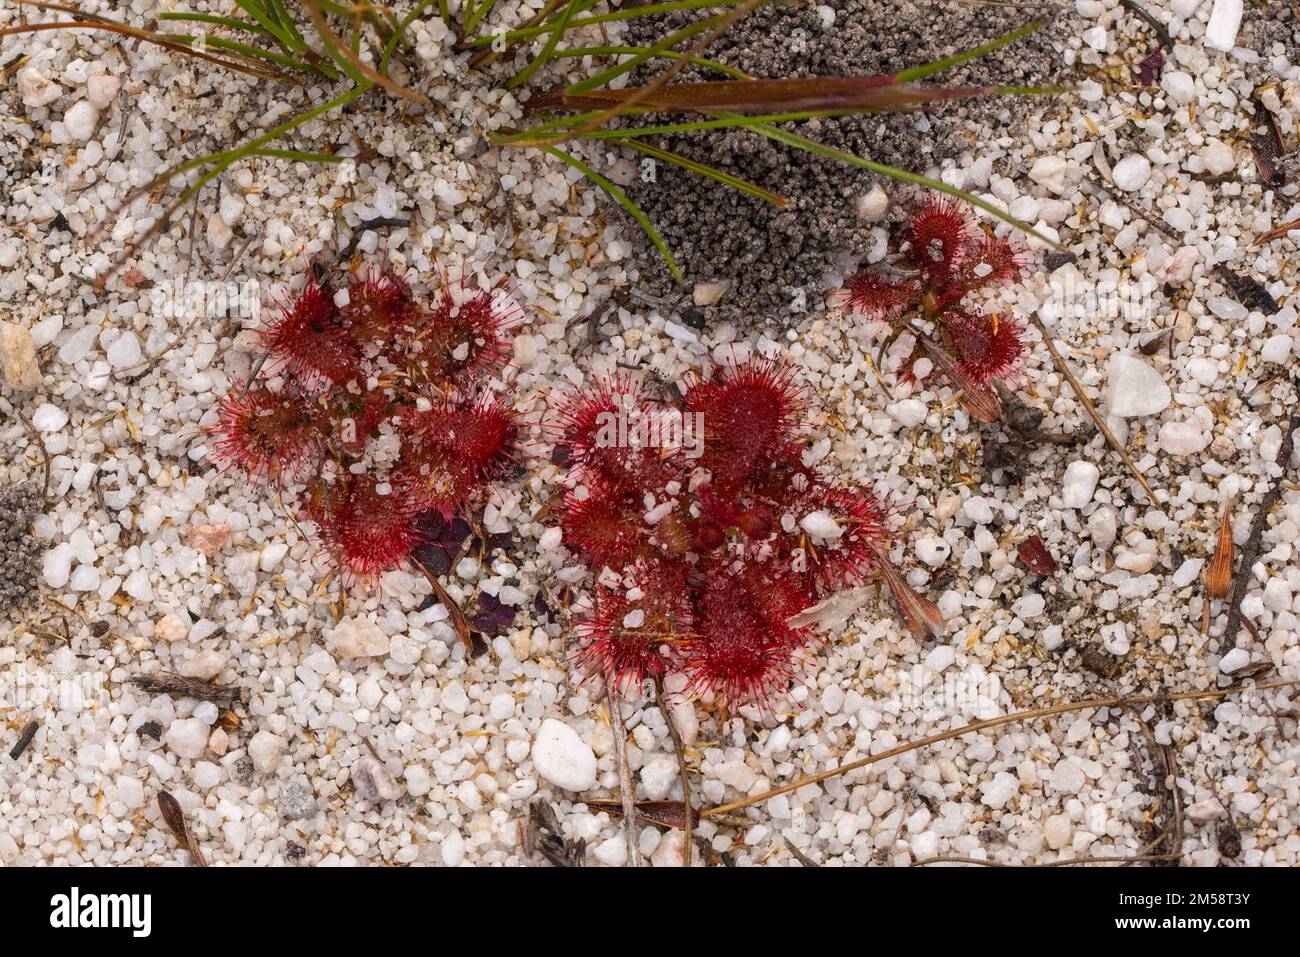 Close up of the rosetted Sundew Drosera trinervia seen in sandy natural habitat close to Porterville in the Western Cape of South Africa Stock Photo